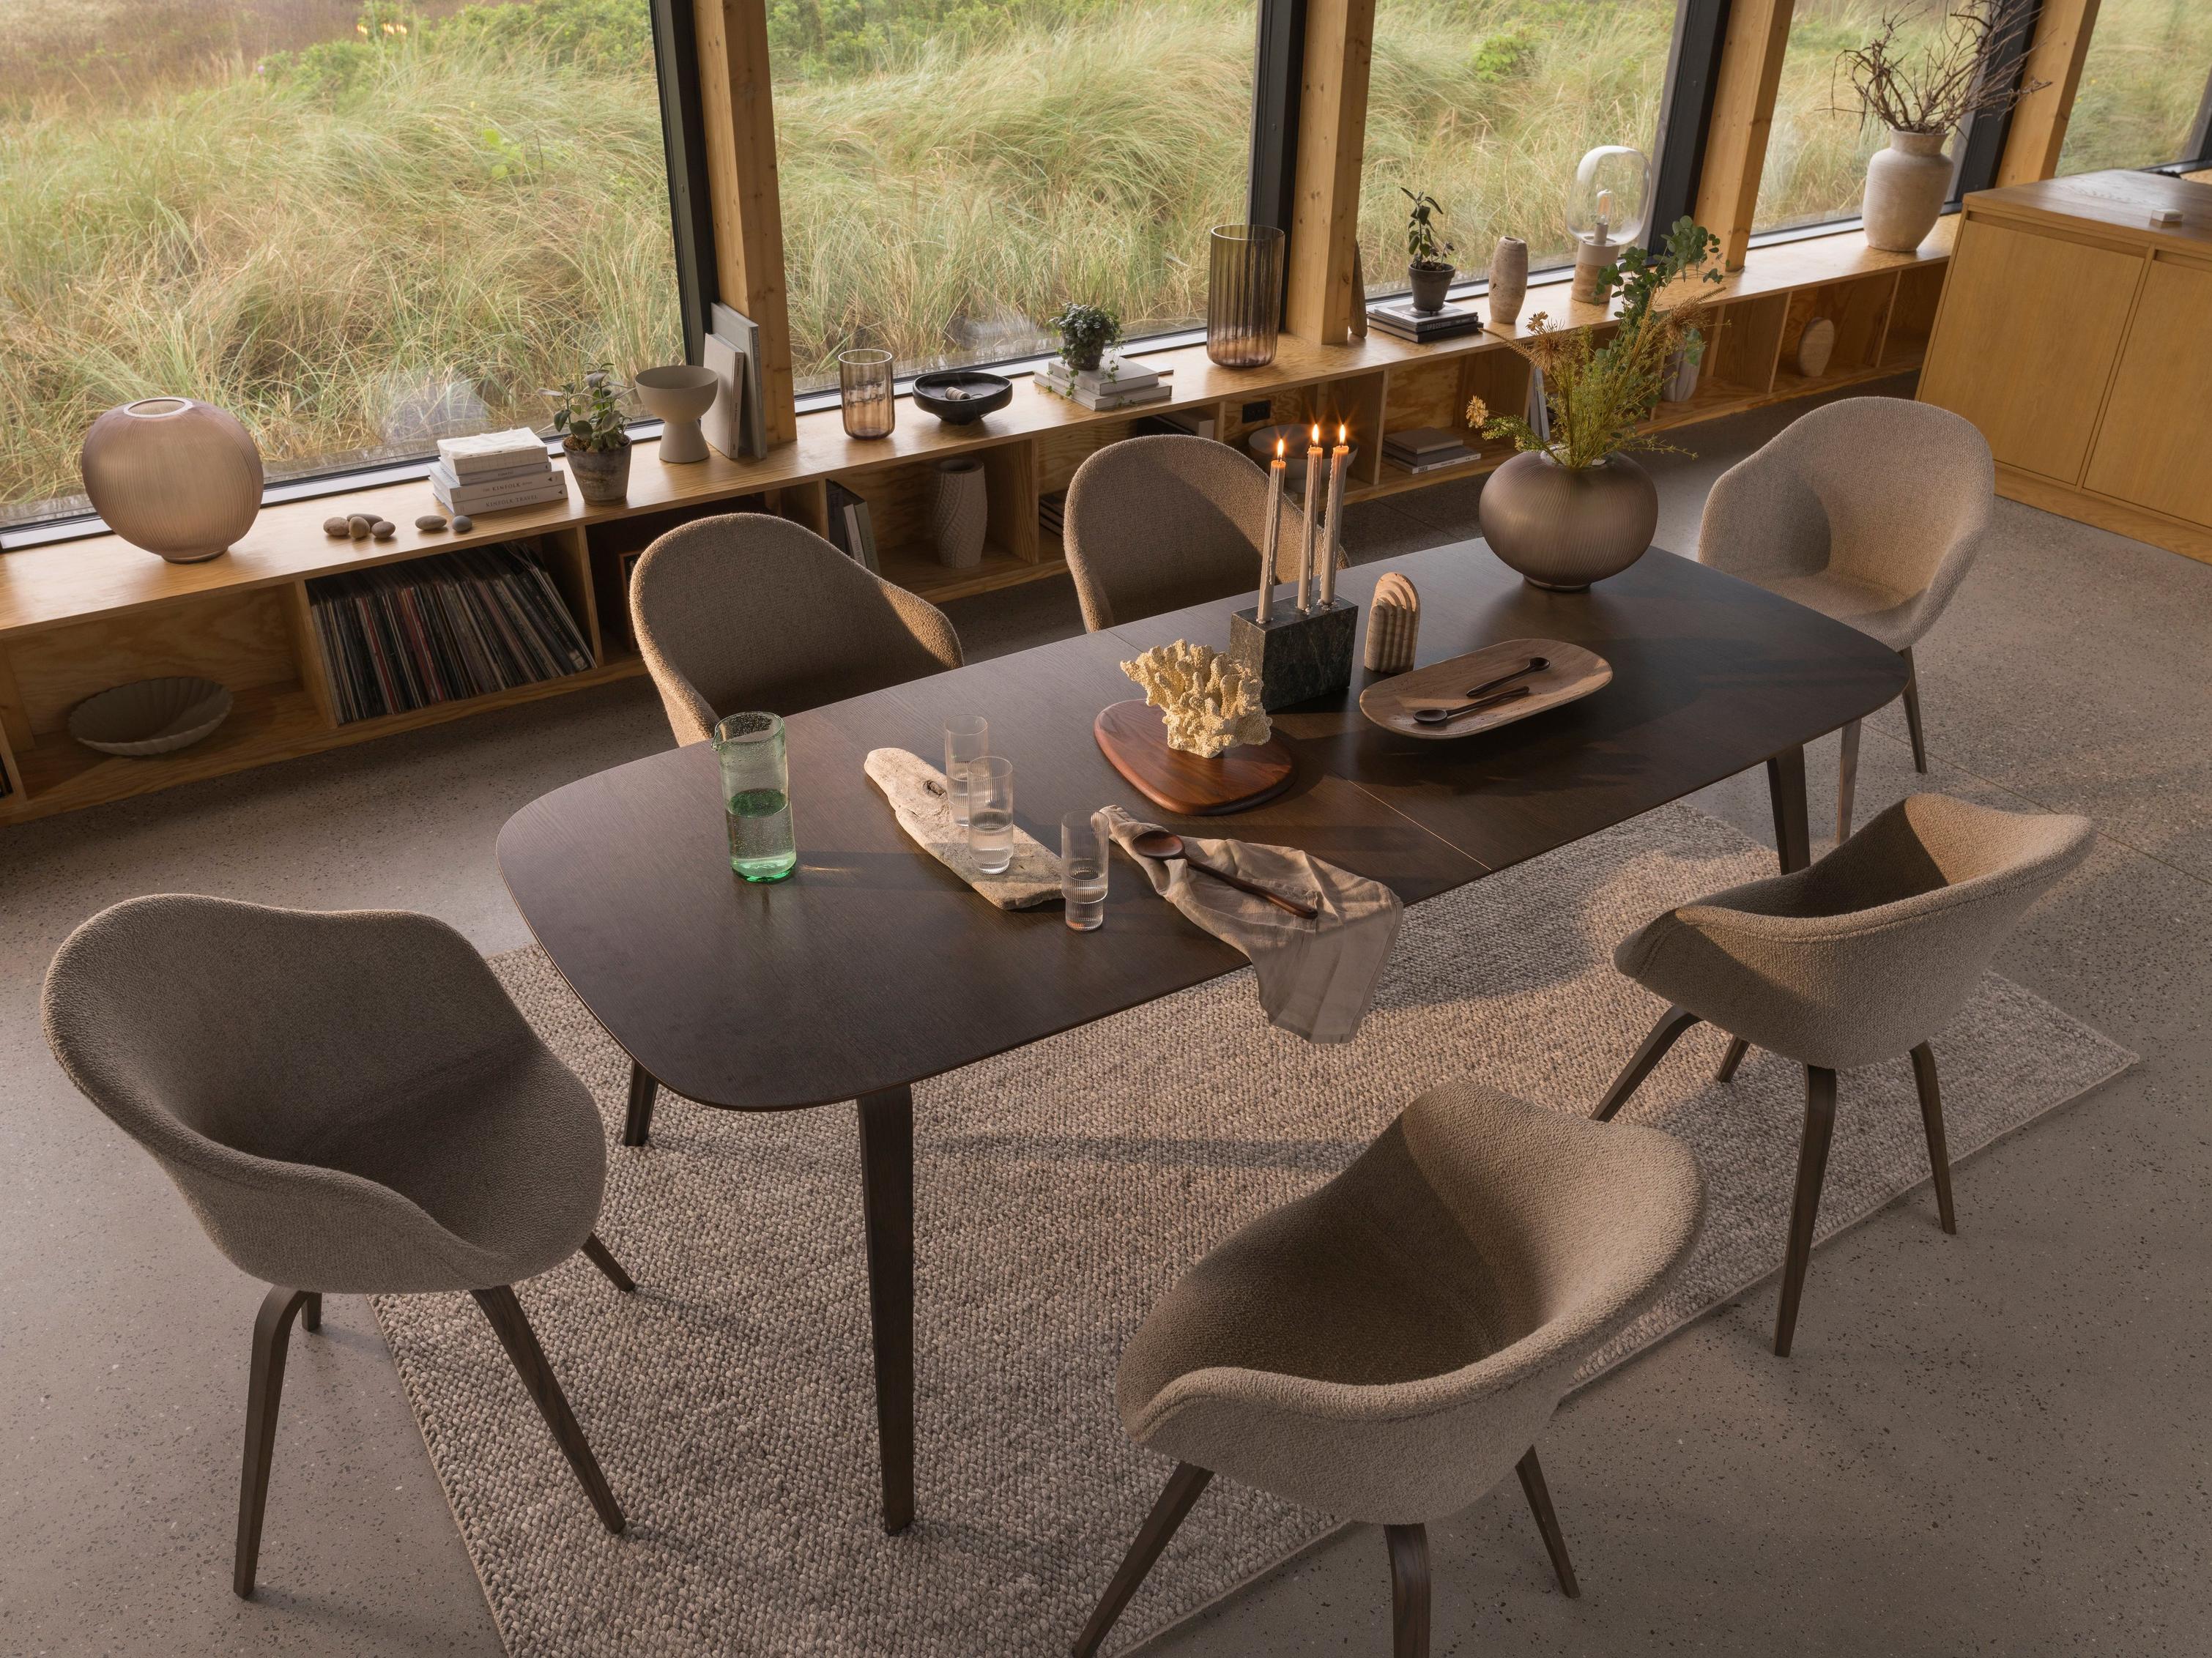 An organic dining setting with natural elements featuring the Hauge dining table and dining chairs.